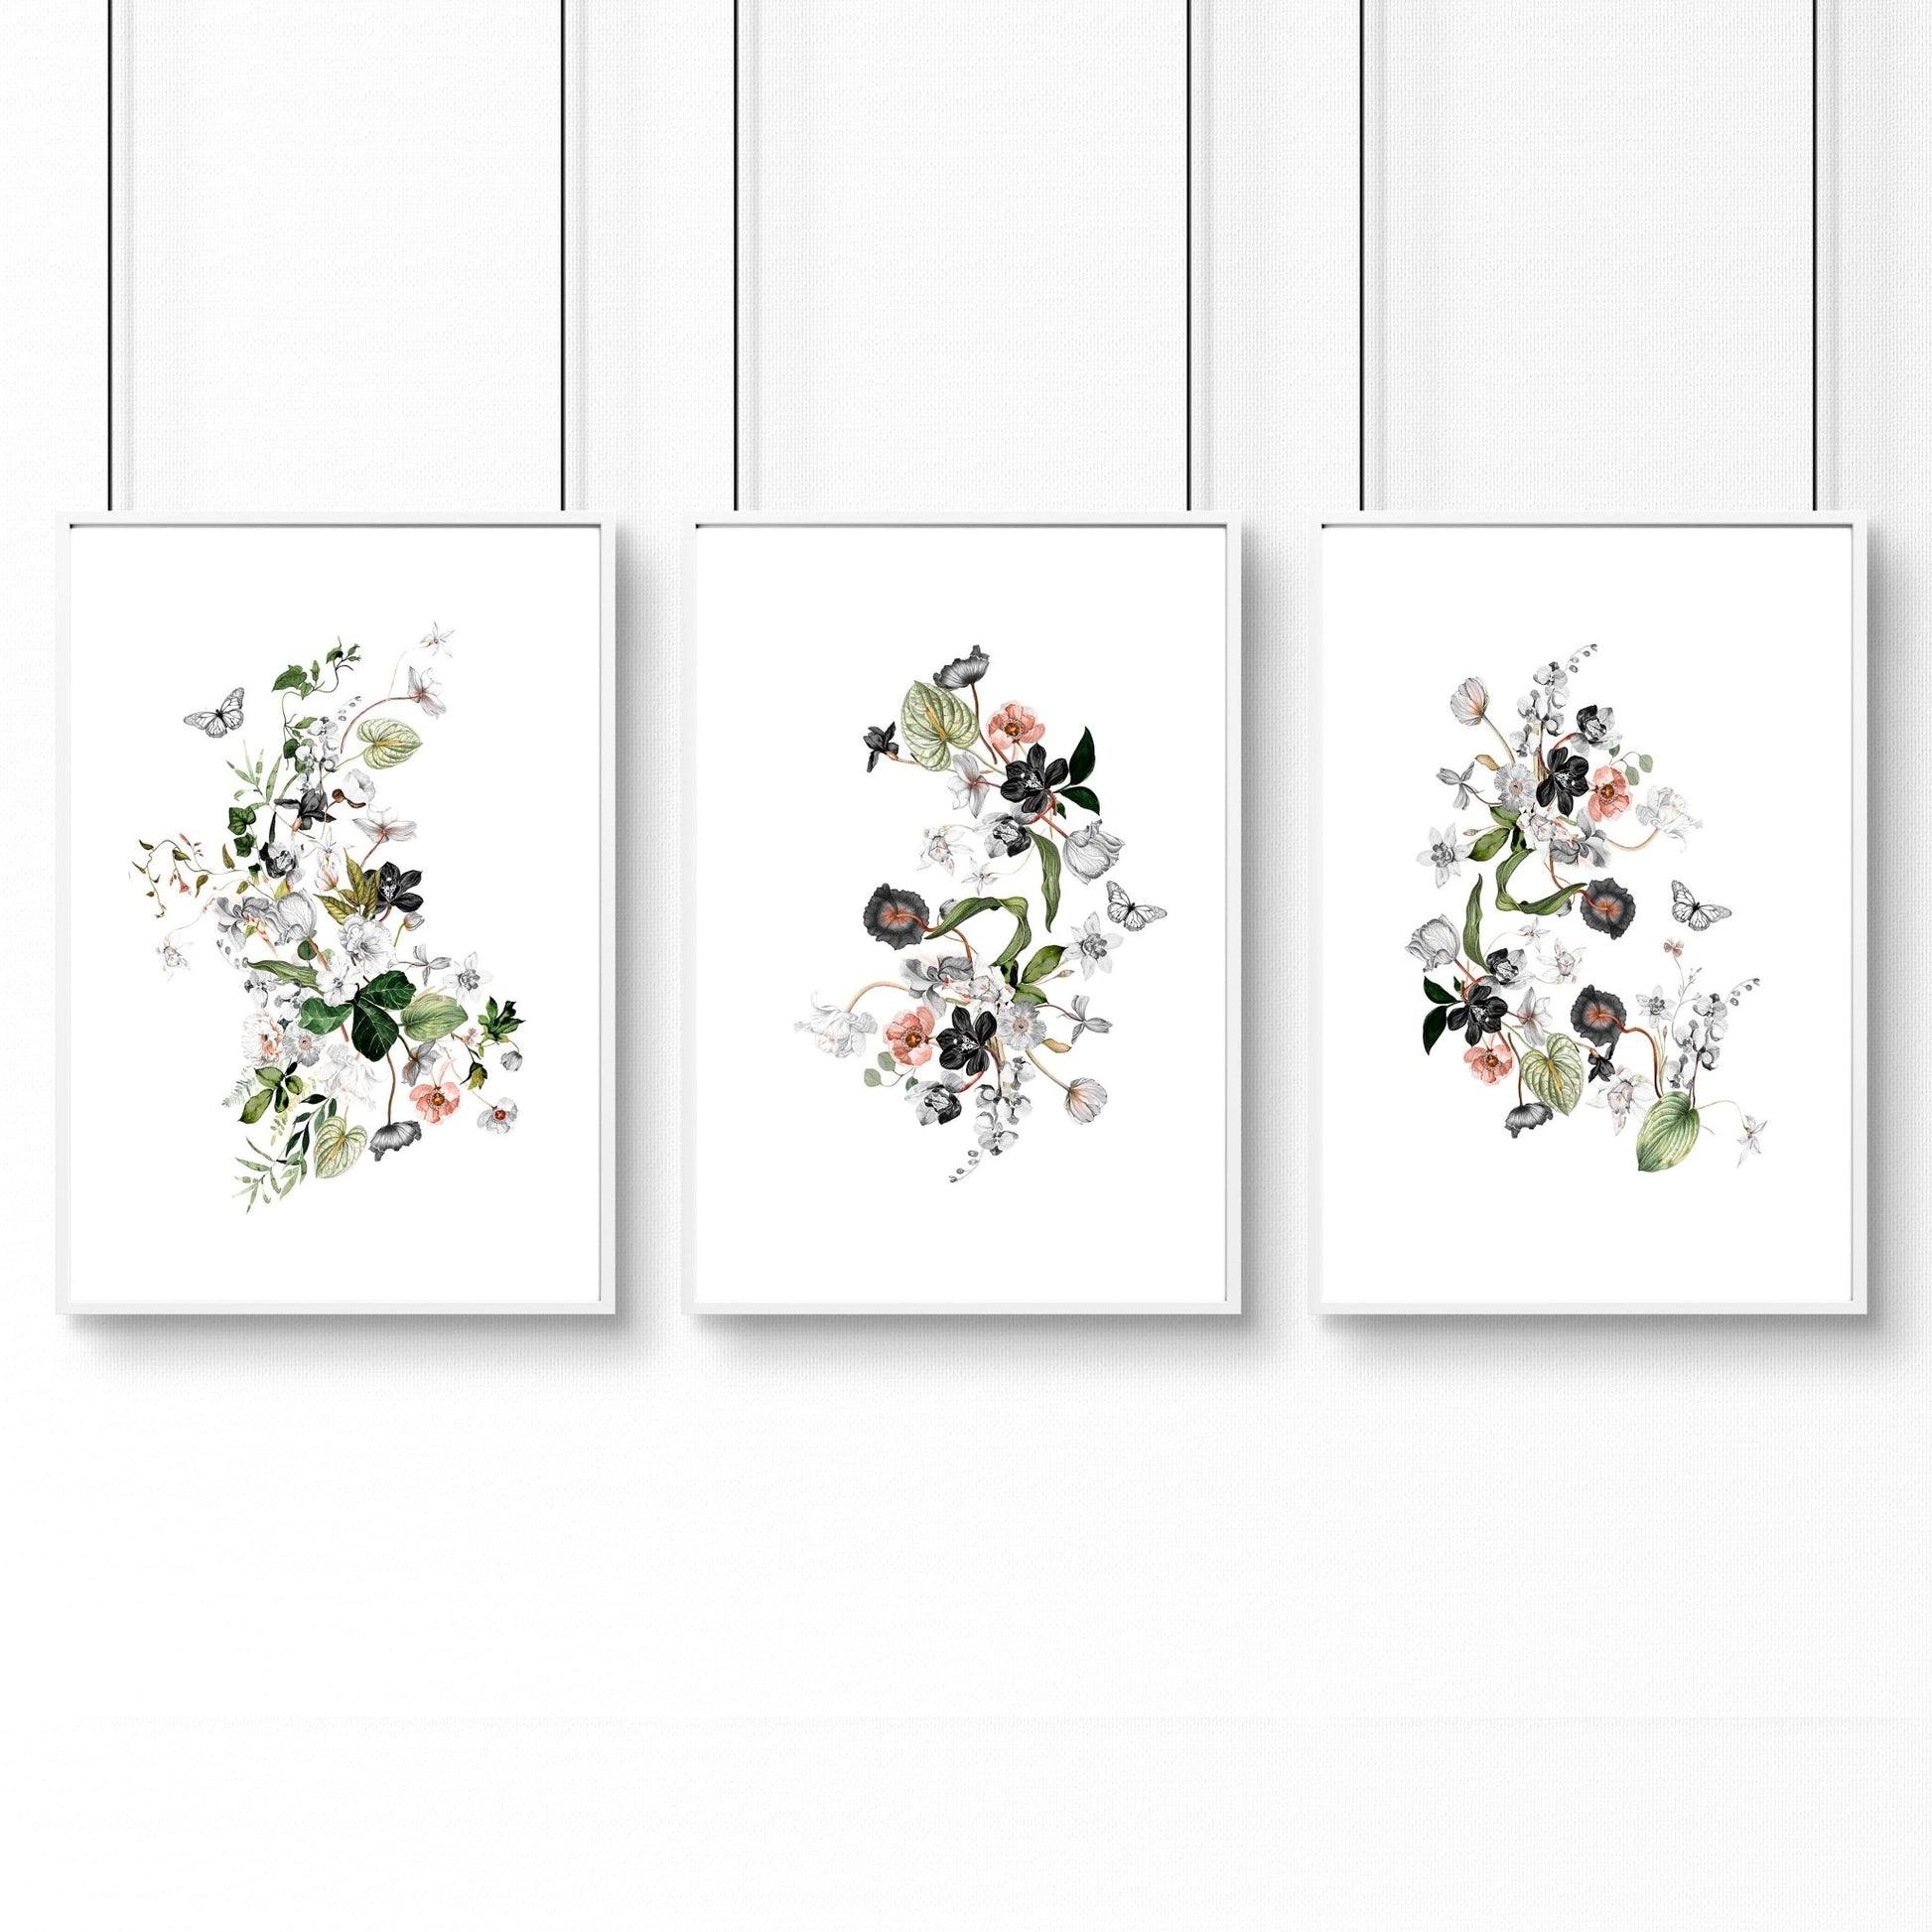 Paintings for home office | set of 3 wall art prints - About Wall Art